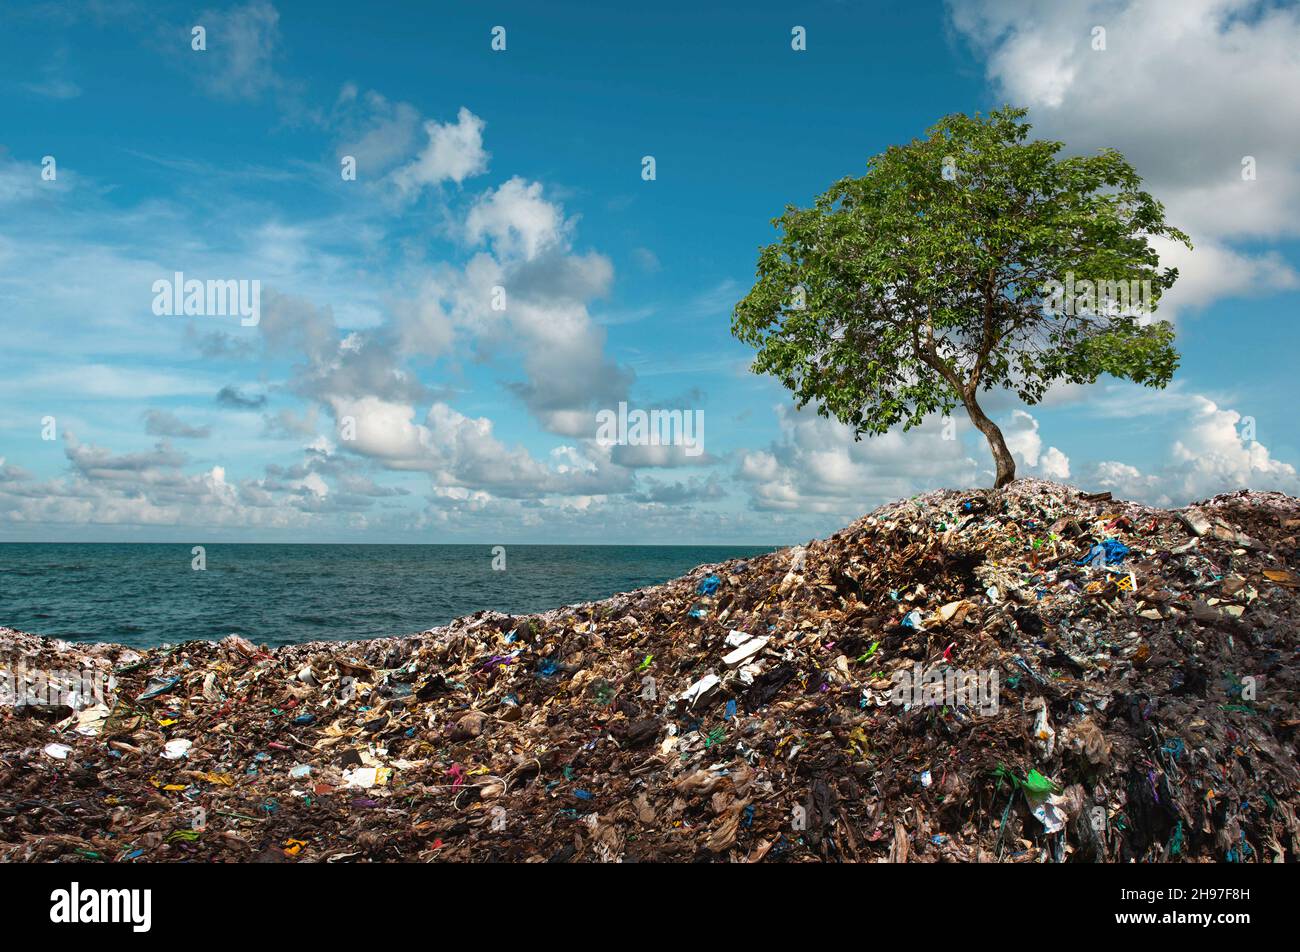 Tree grows between Mountains of Trash. In unreal surreal environment garbage nature pollution ecology. Environment concept. Stock Photo